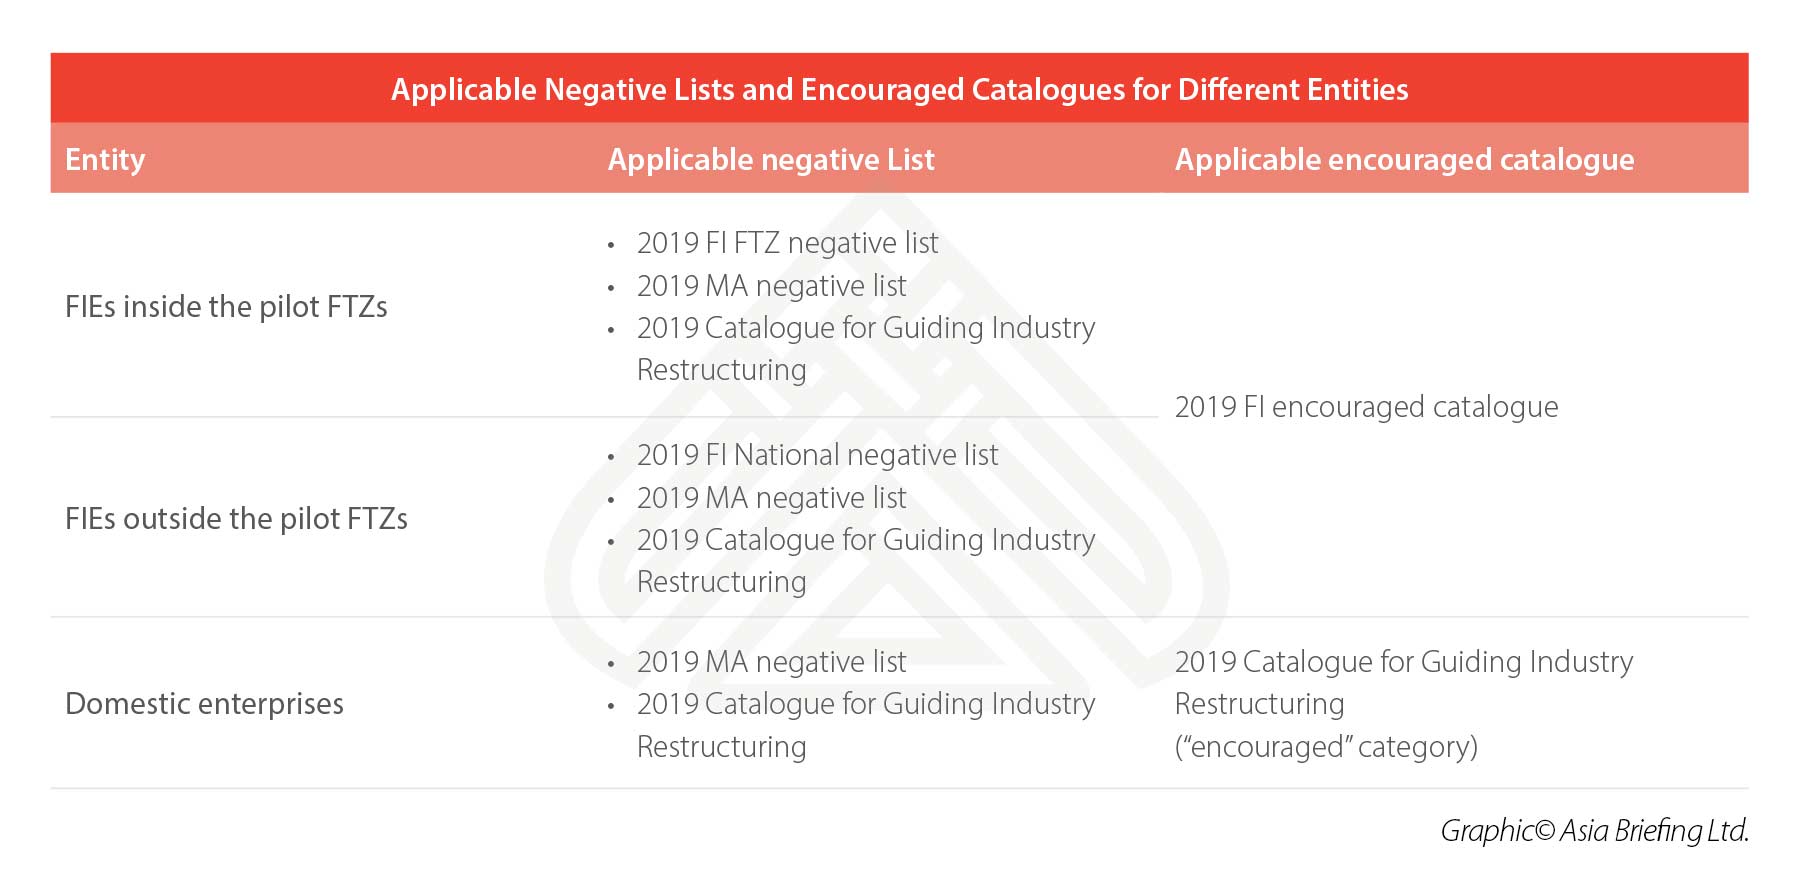 Updated-2019-Applicable Negative Lists and Encouraged Catalogues for Different Entities